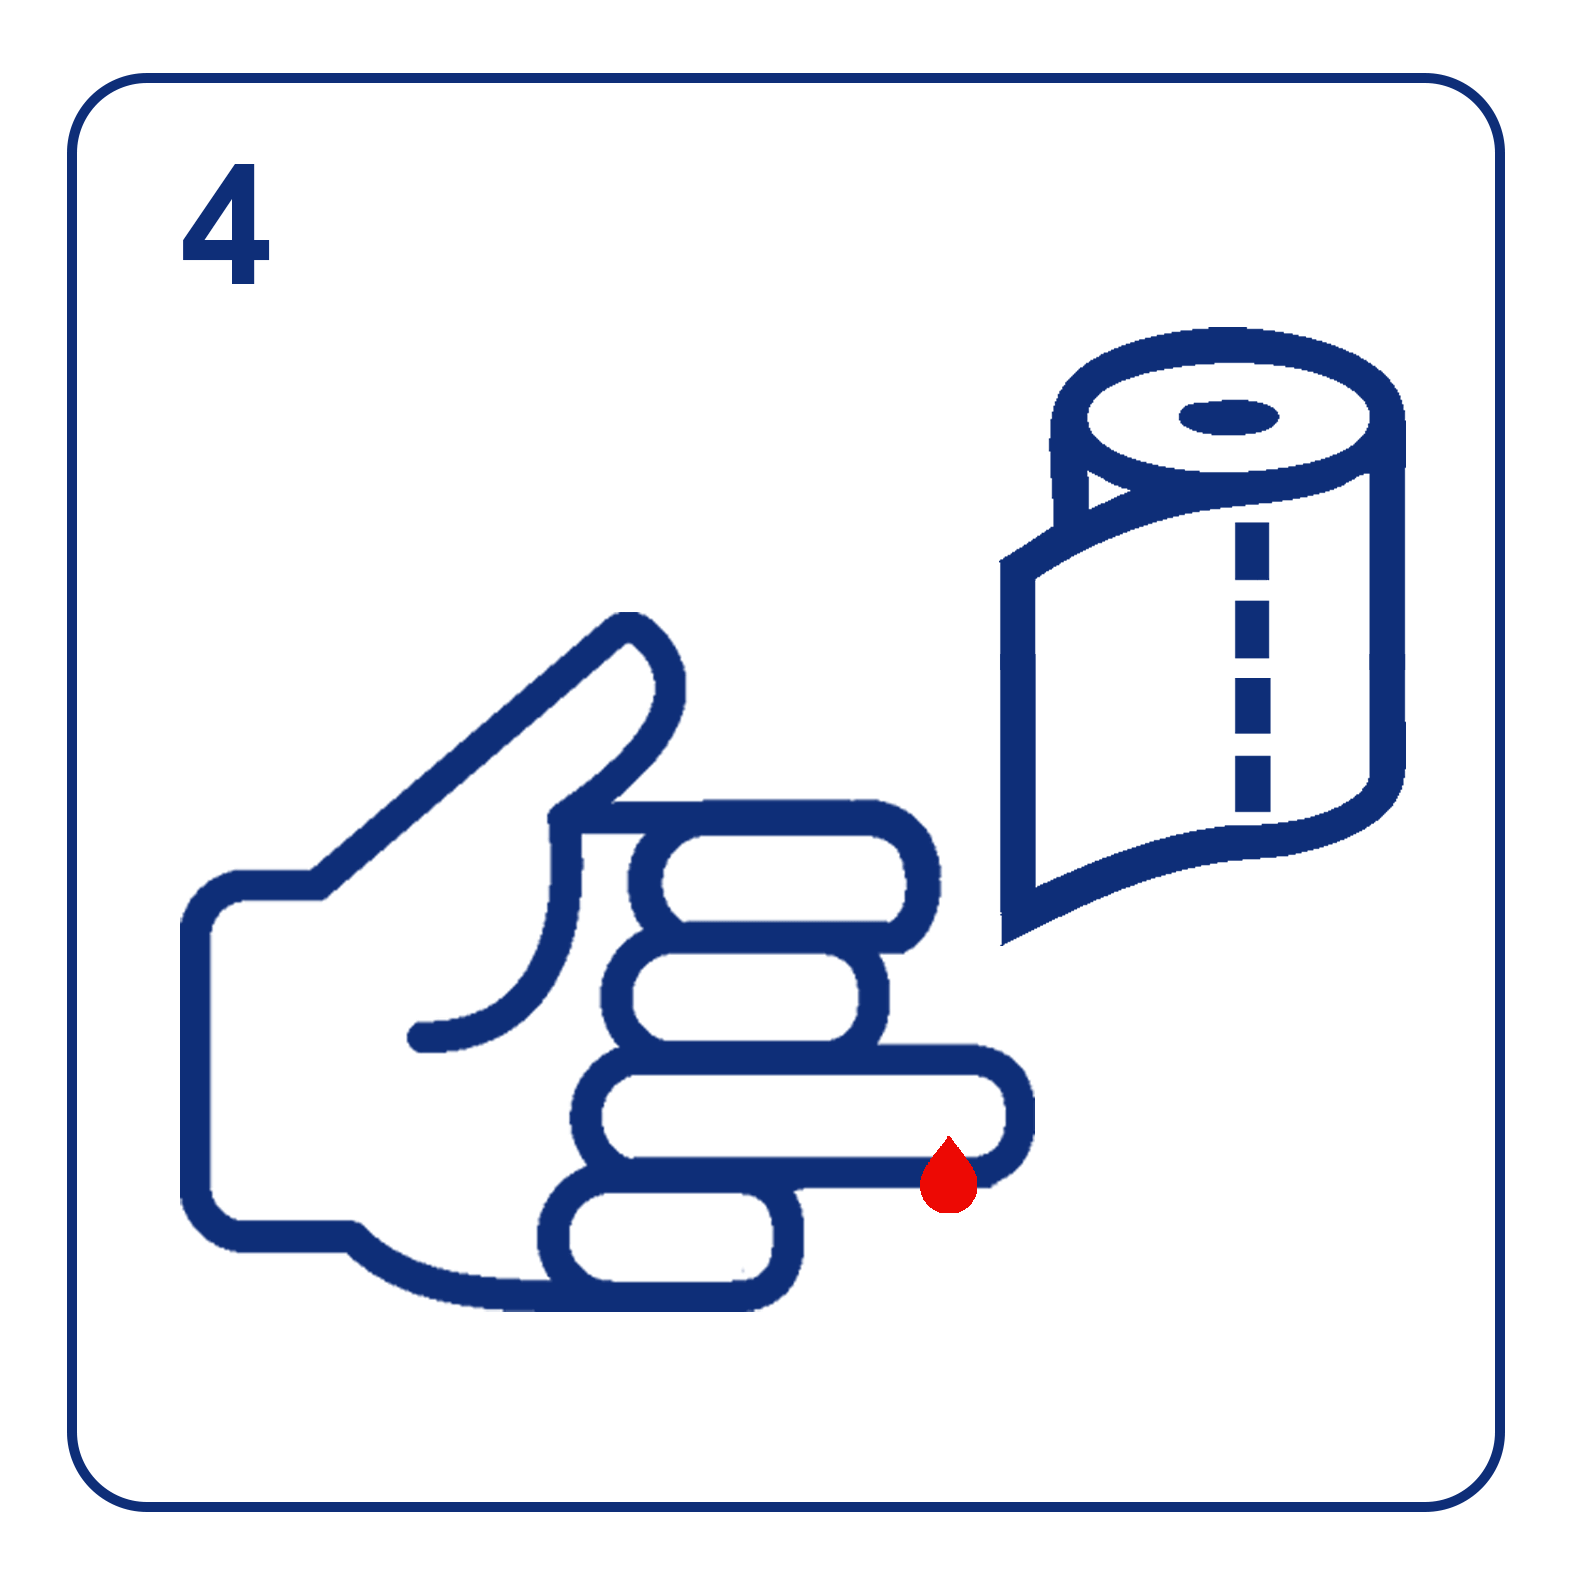 Use a clean paper towel or similar material to wipe off the first drop of blood.